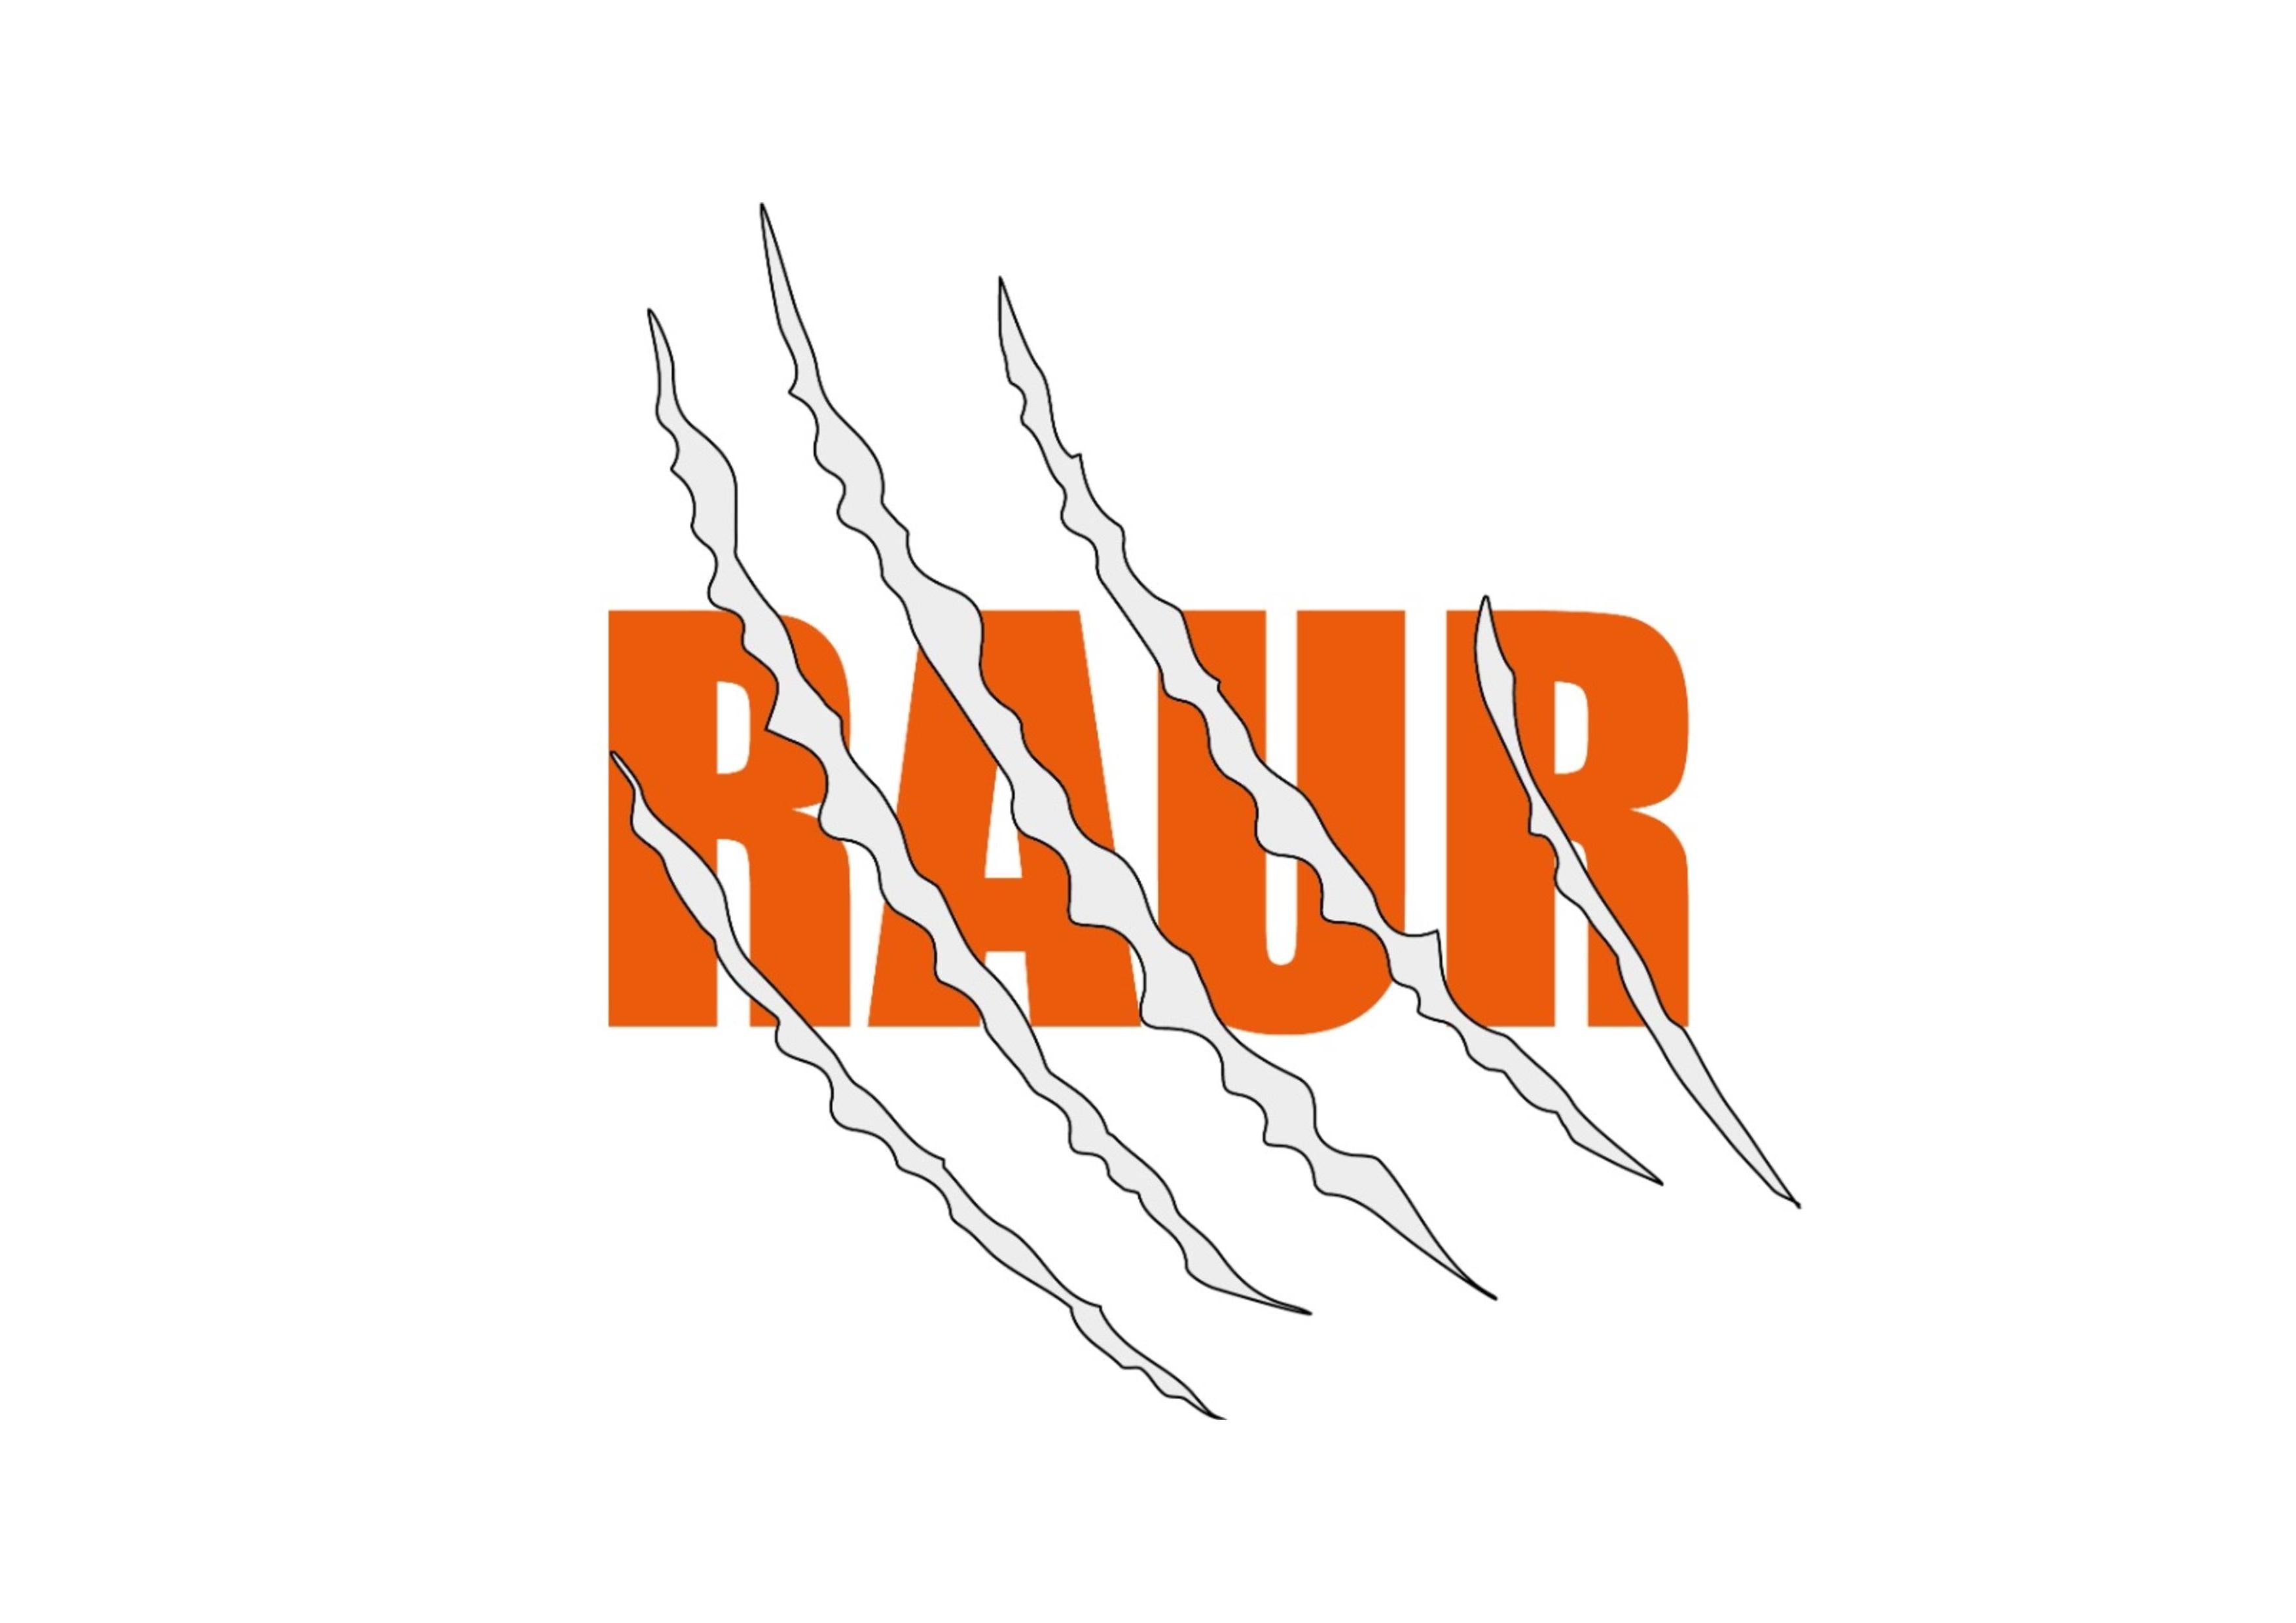 Here at RAUR we have durable and fashionable gym wear that can be worn for any workout you have!